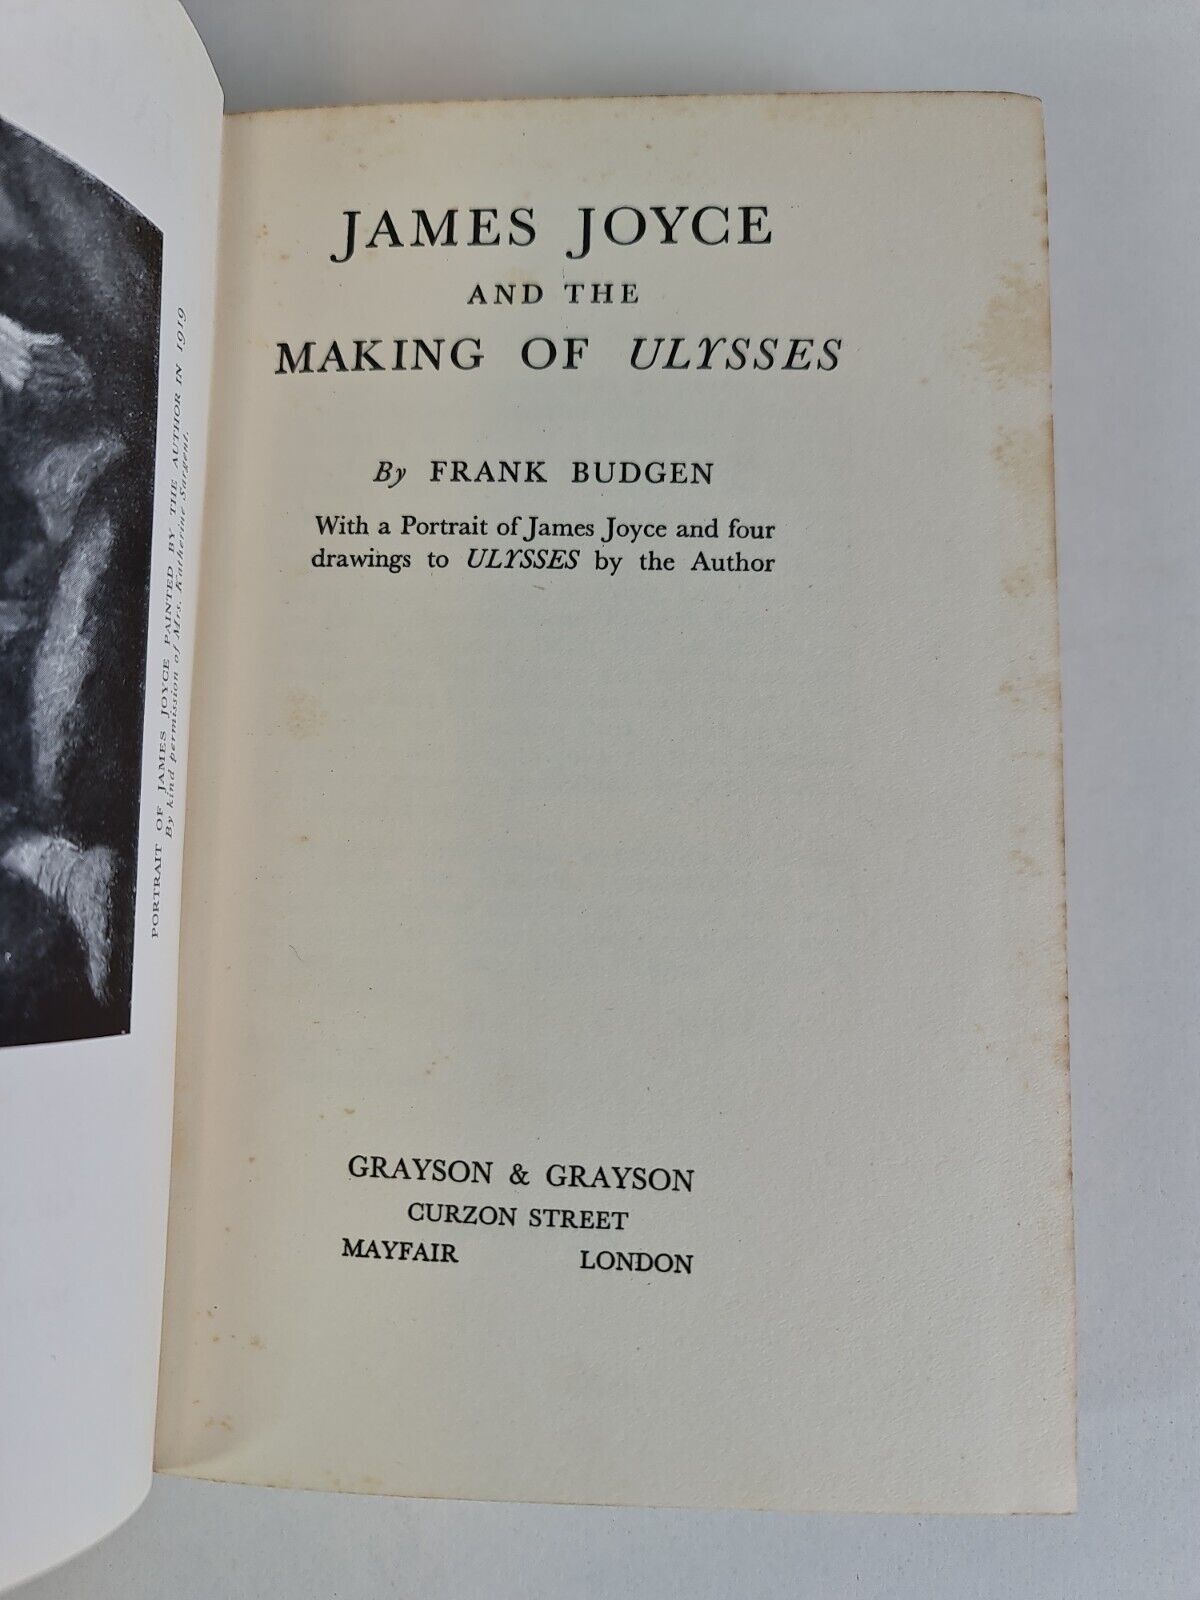 James Joyce and the Making of Ulysses by Frank Budgen (1937)